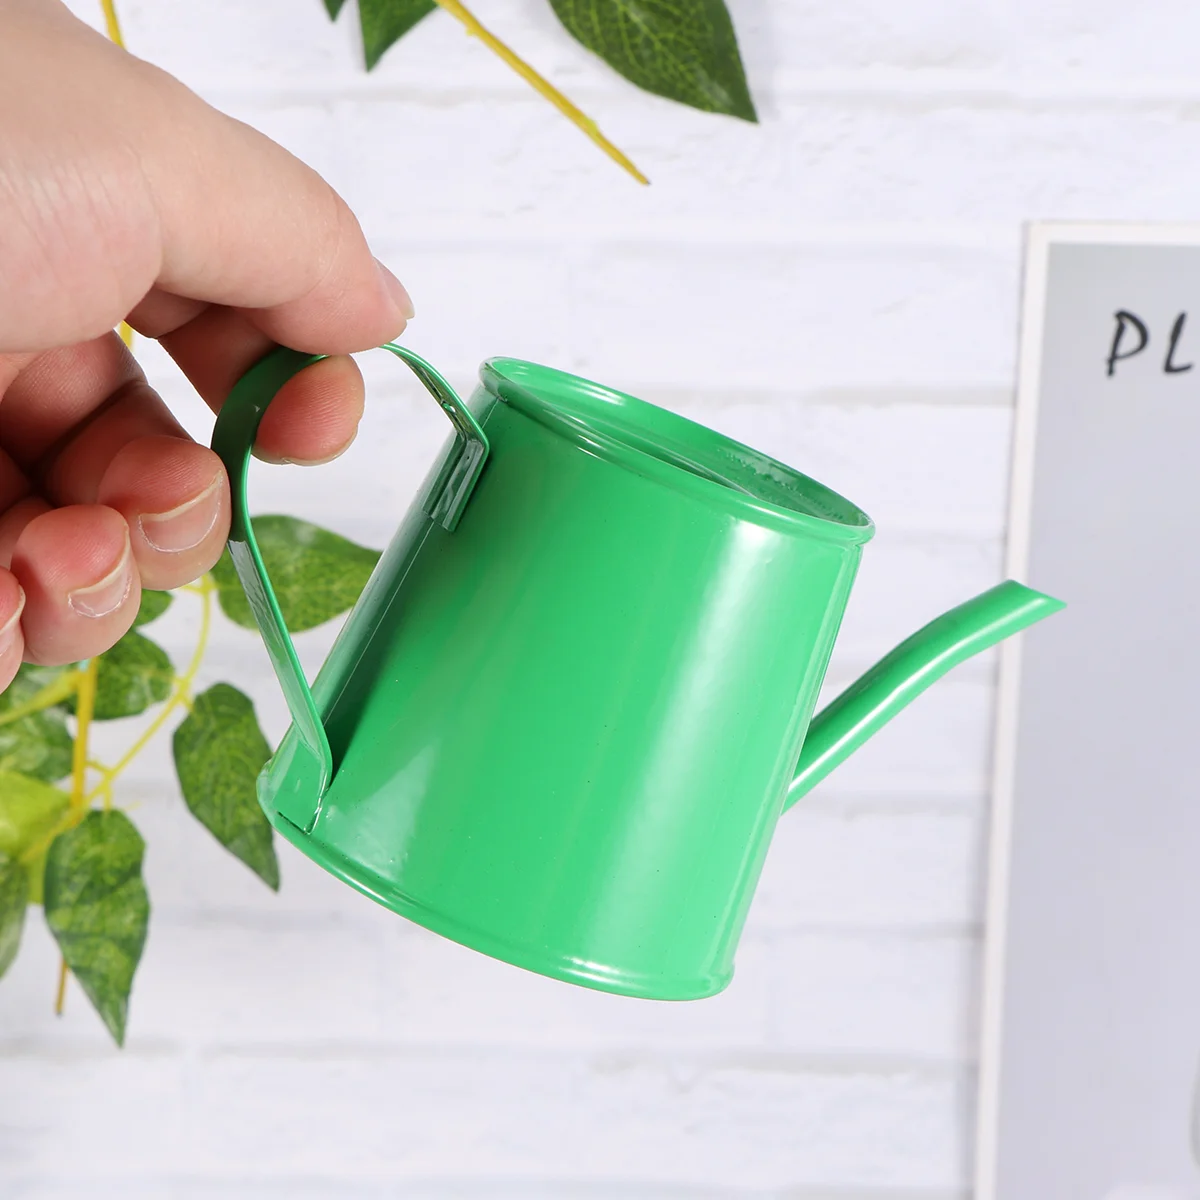 Mini Iron Watering Can Household Watering Can Watering Pot Decor Sprinkled Kettle Layout for Home Desktop Photo (Rosy)